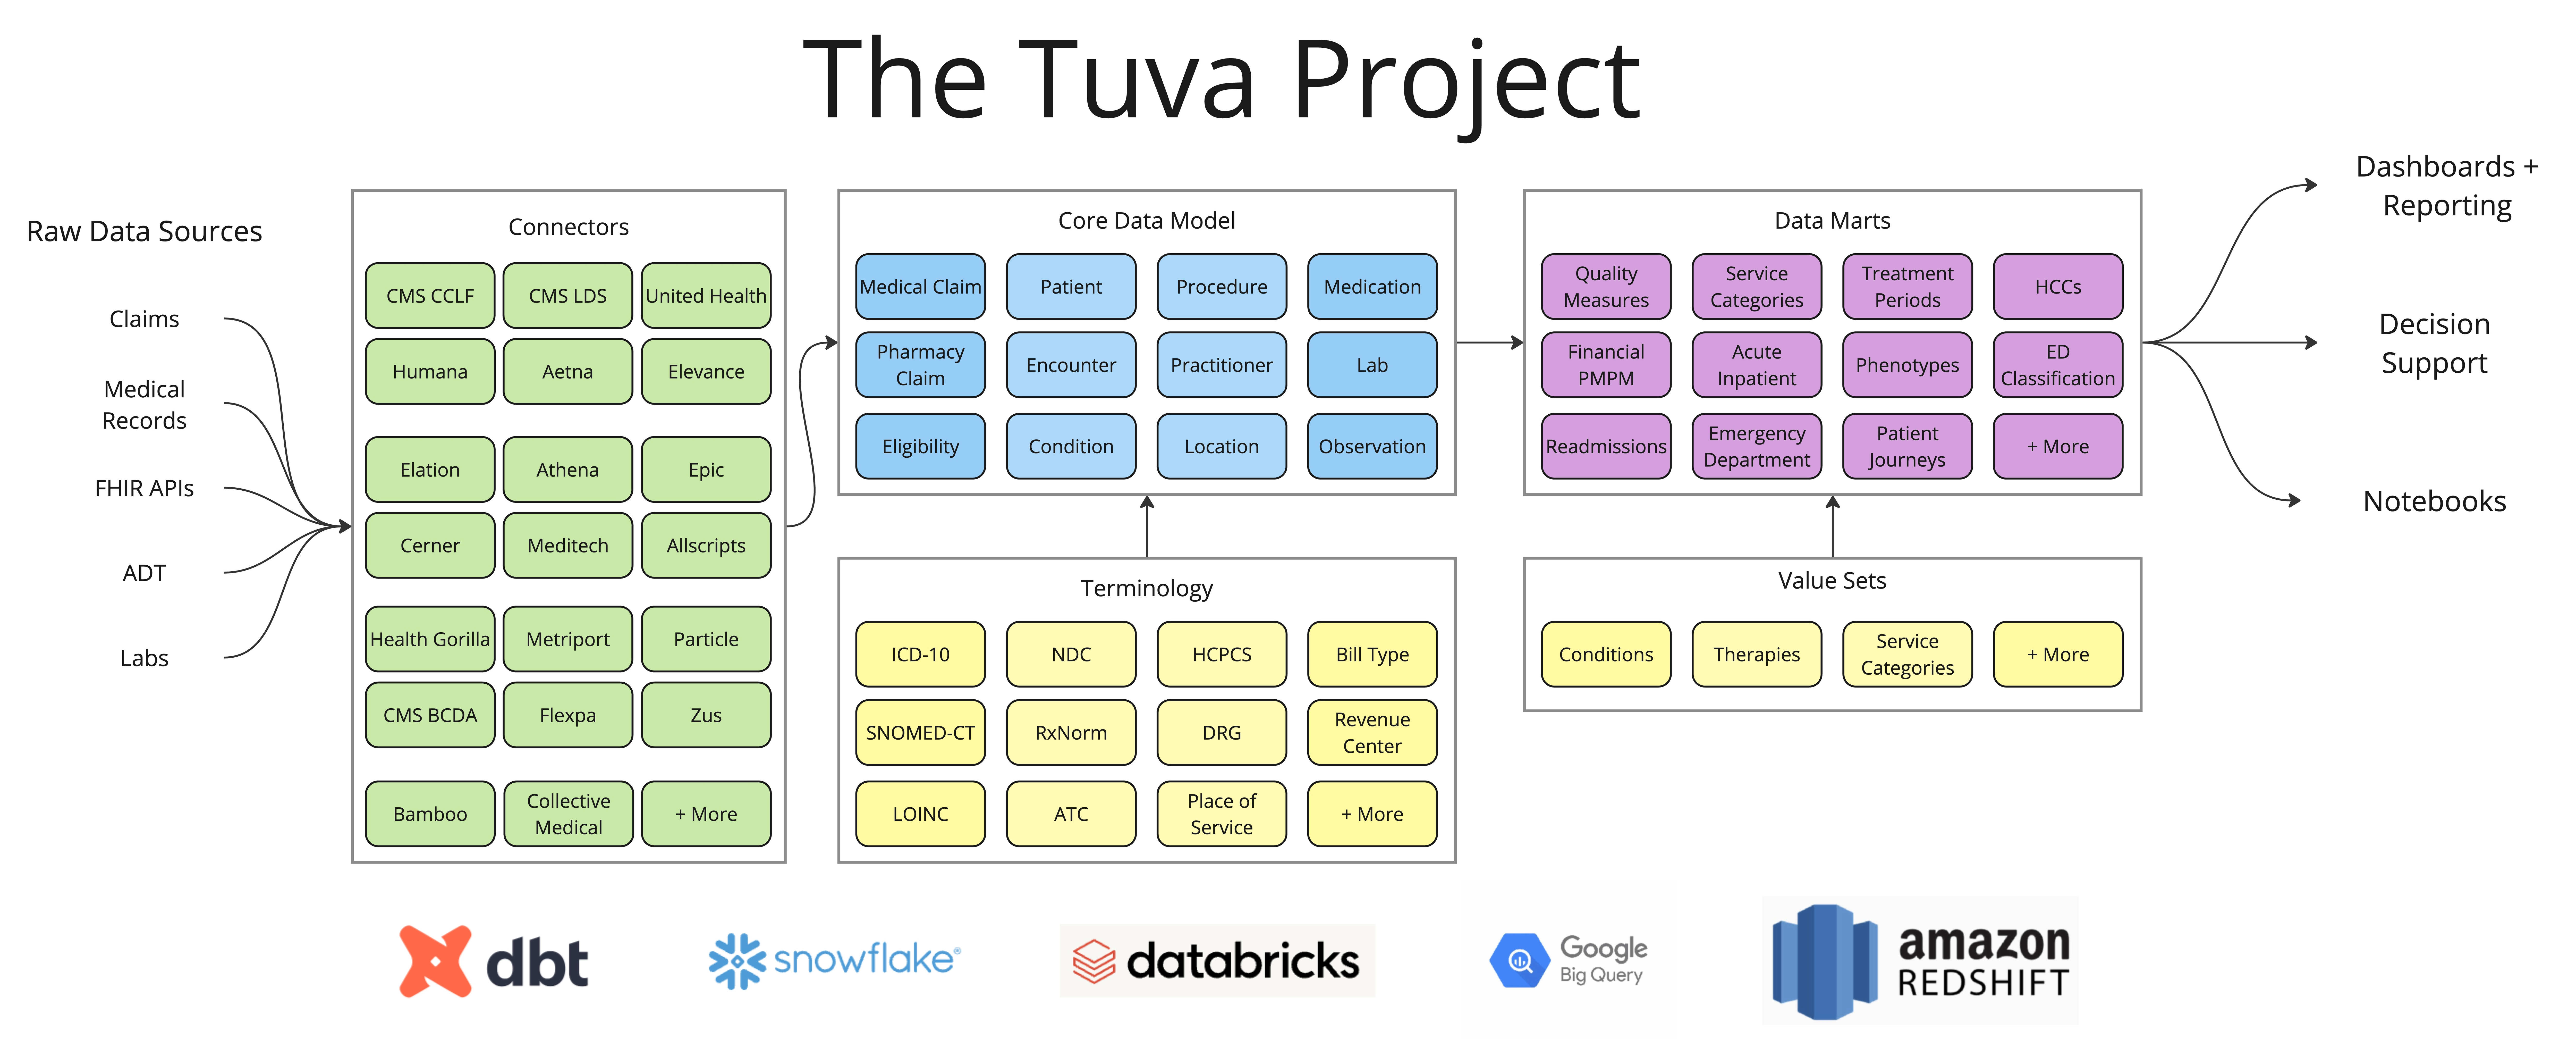 Tuva Project Overview